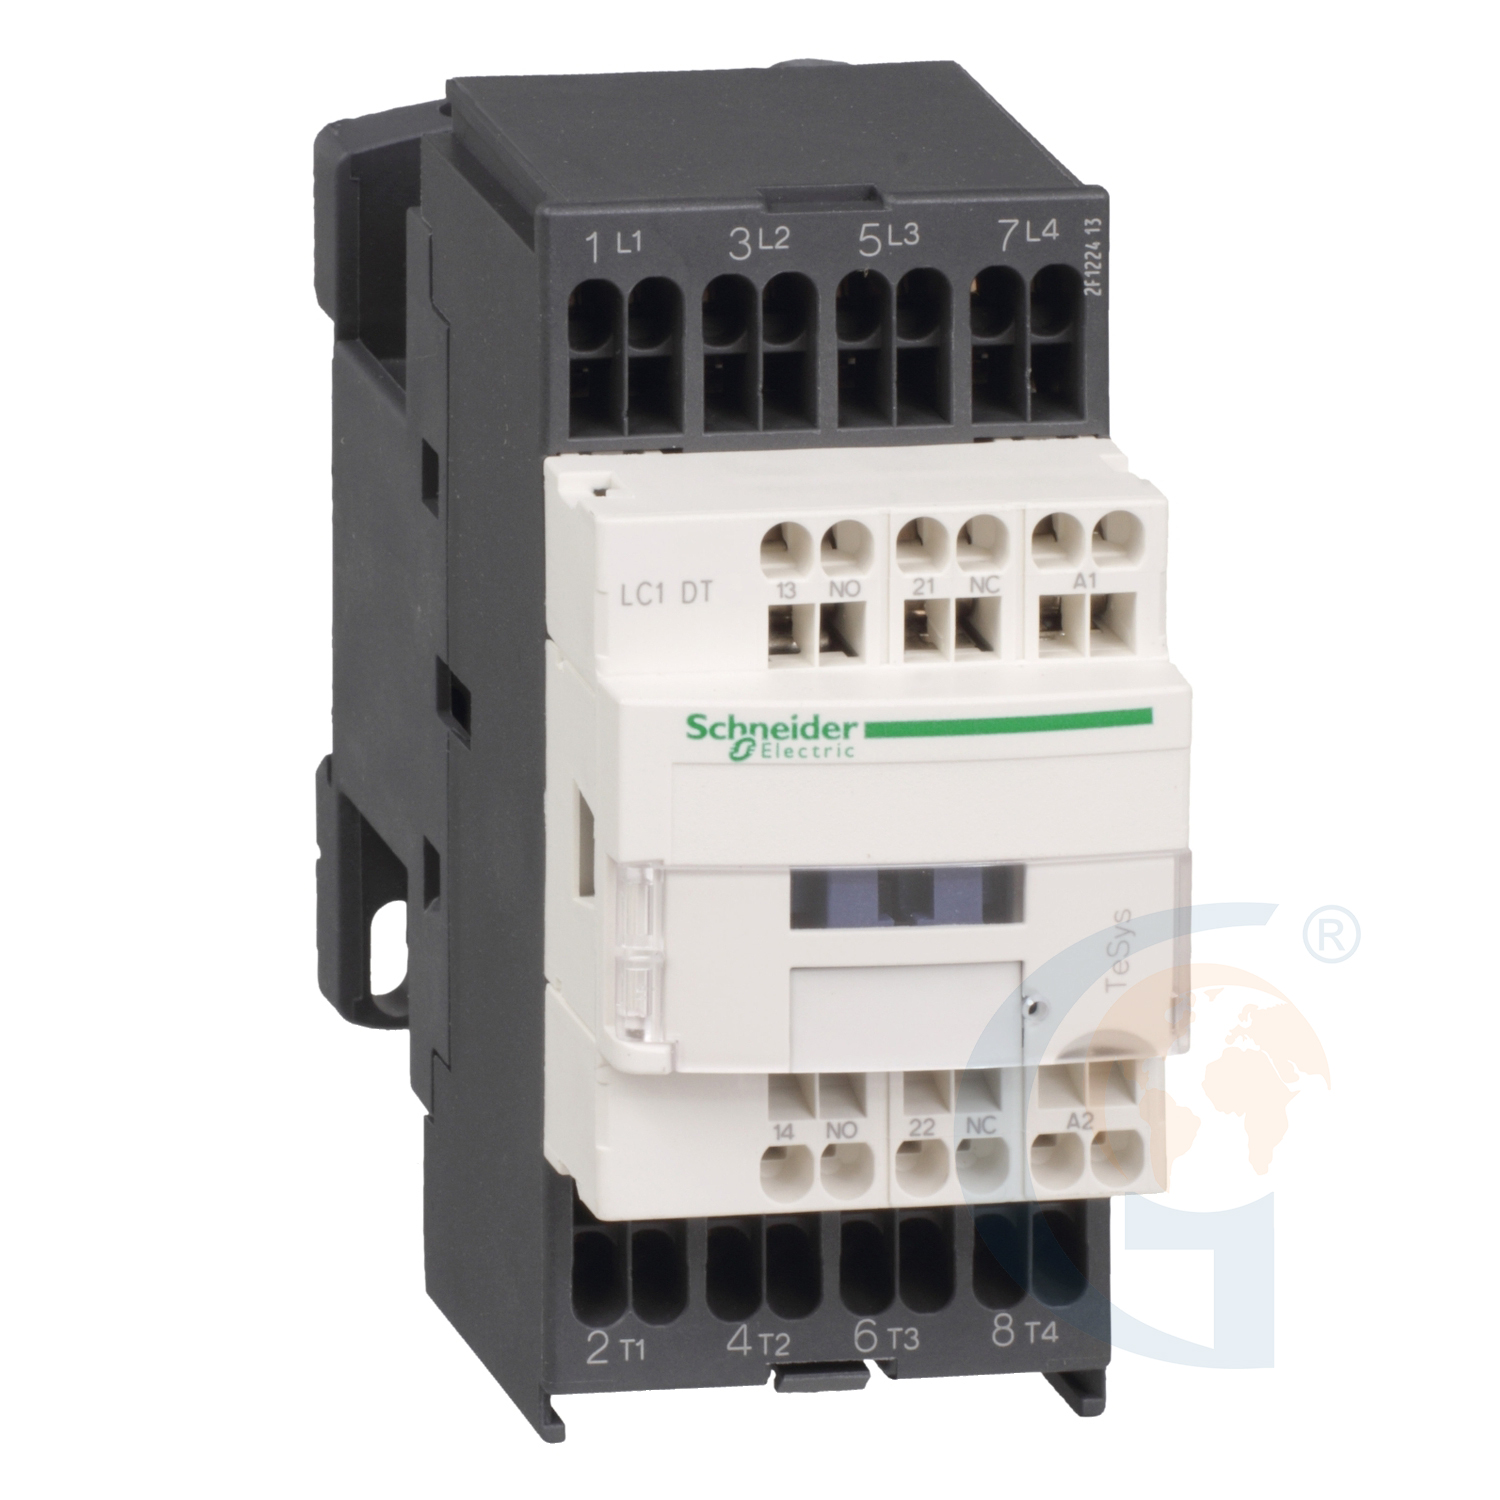 Schneider Electric LC1DT323BL TeSys D contactor – 4P(4 NO) – AC-1 – <= 440 V 32 A - 24 V DC low cons coil https://gesrepair.com/wp-content/uploads/2020/Schneider/Schneider_Electric_LC1DT323BL_.jpg